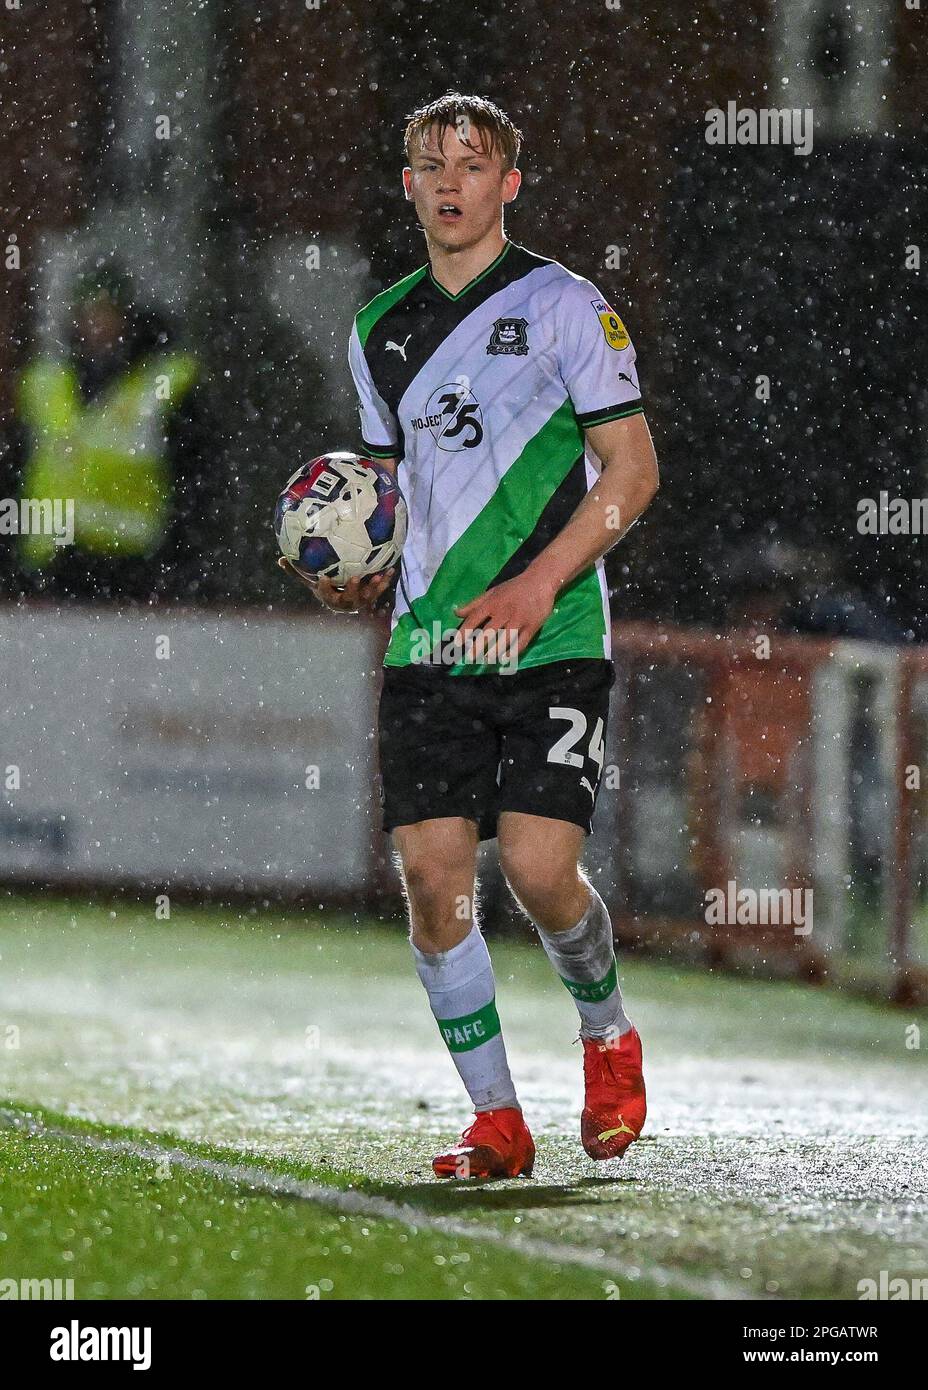 Saxon Earley #24 of Plymouth Argyle in action during the Sky Bet League 1 match Accrington Stanley vs Plymouth Argyle at Wham Stadium, Accrington, United Kingdom, 21st March 2023  (Photo by Stan Kasala/News Images) Stock Photo